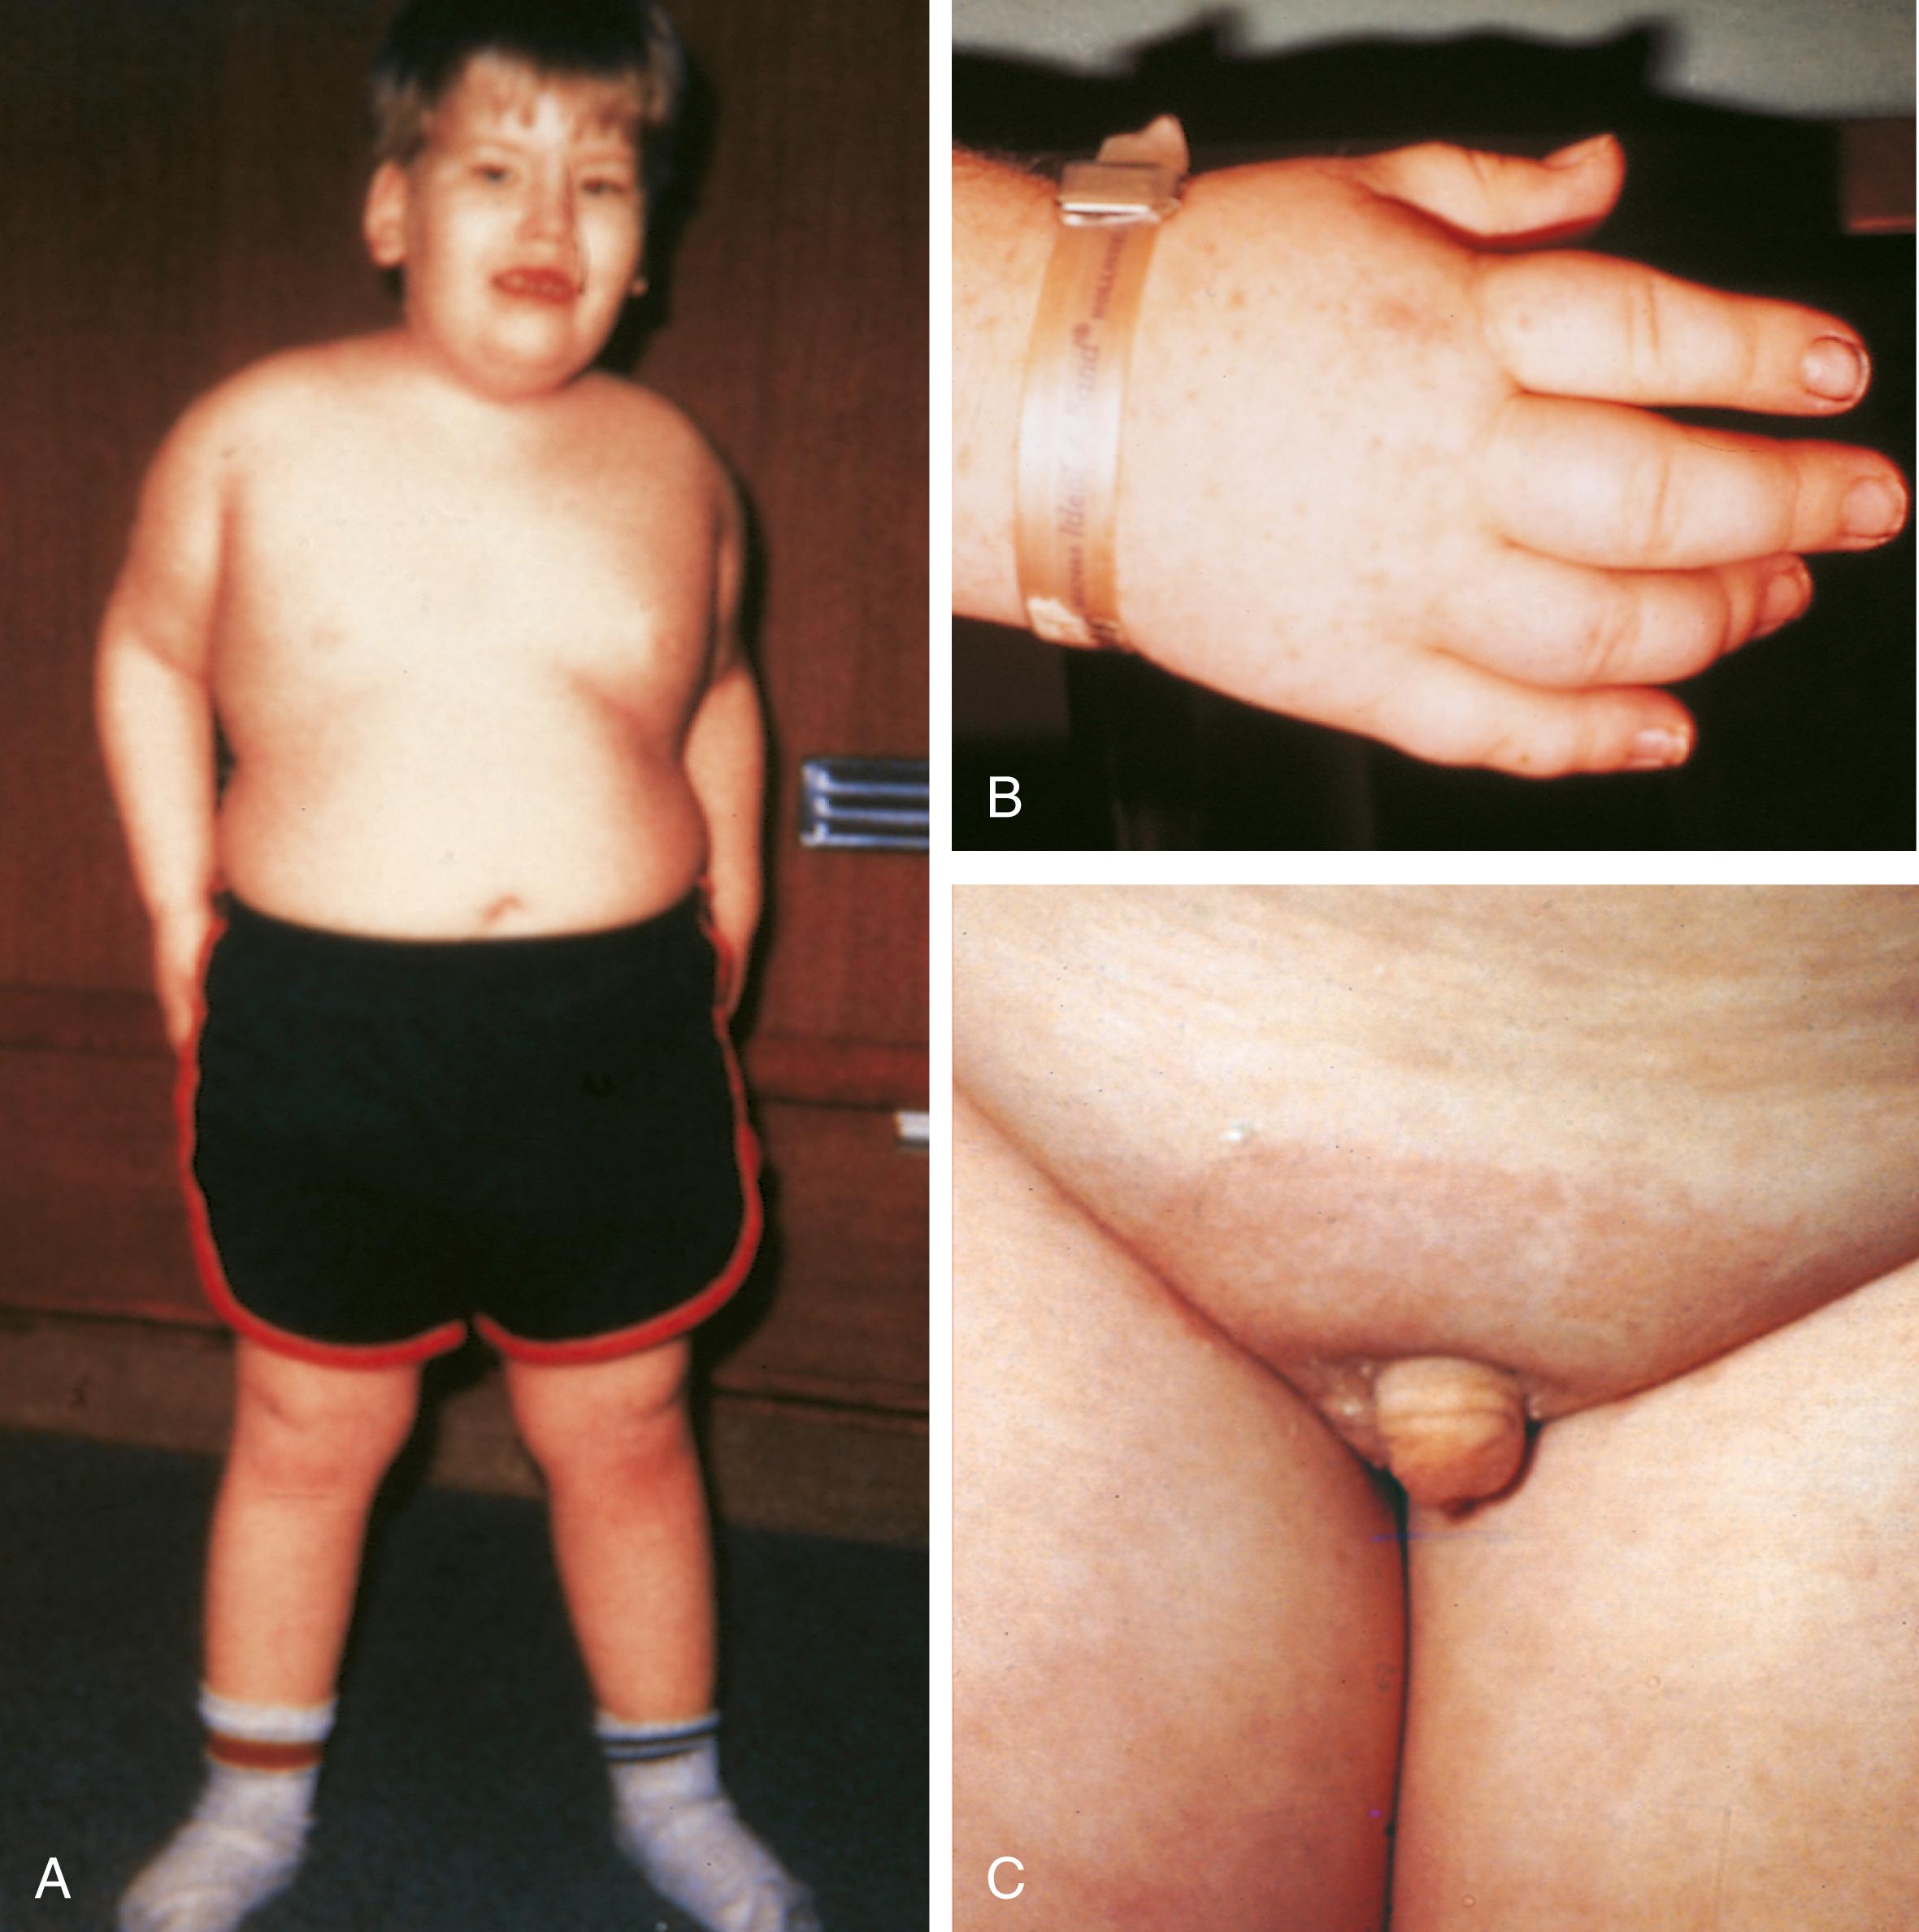 Fig. 1.26, Prader-Willi syndrome. (A) This patient demonstrates the marked obesity characteristic of Prader-Willi syndrome. Excess fat is distributed over the trunk, buttocks, and proximal extremities. (B and C) Small hands (and feet) and a hypoplastic penis and scrotum are other typical features.